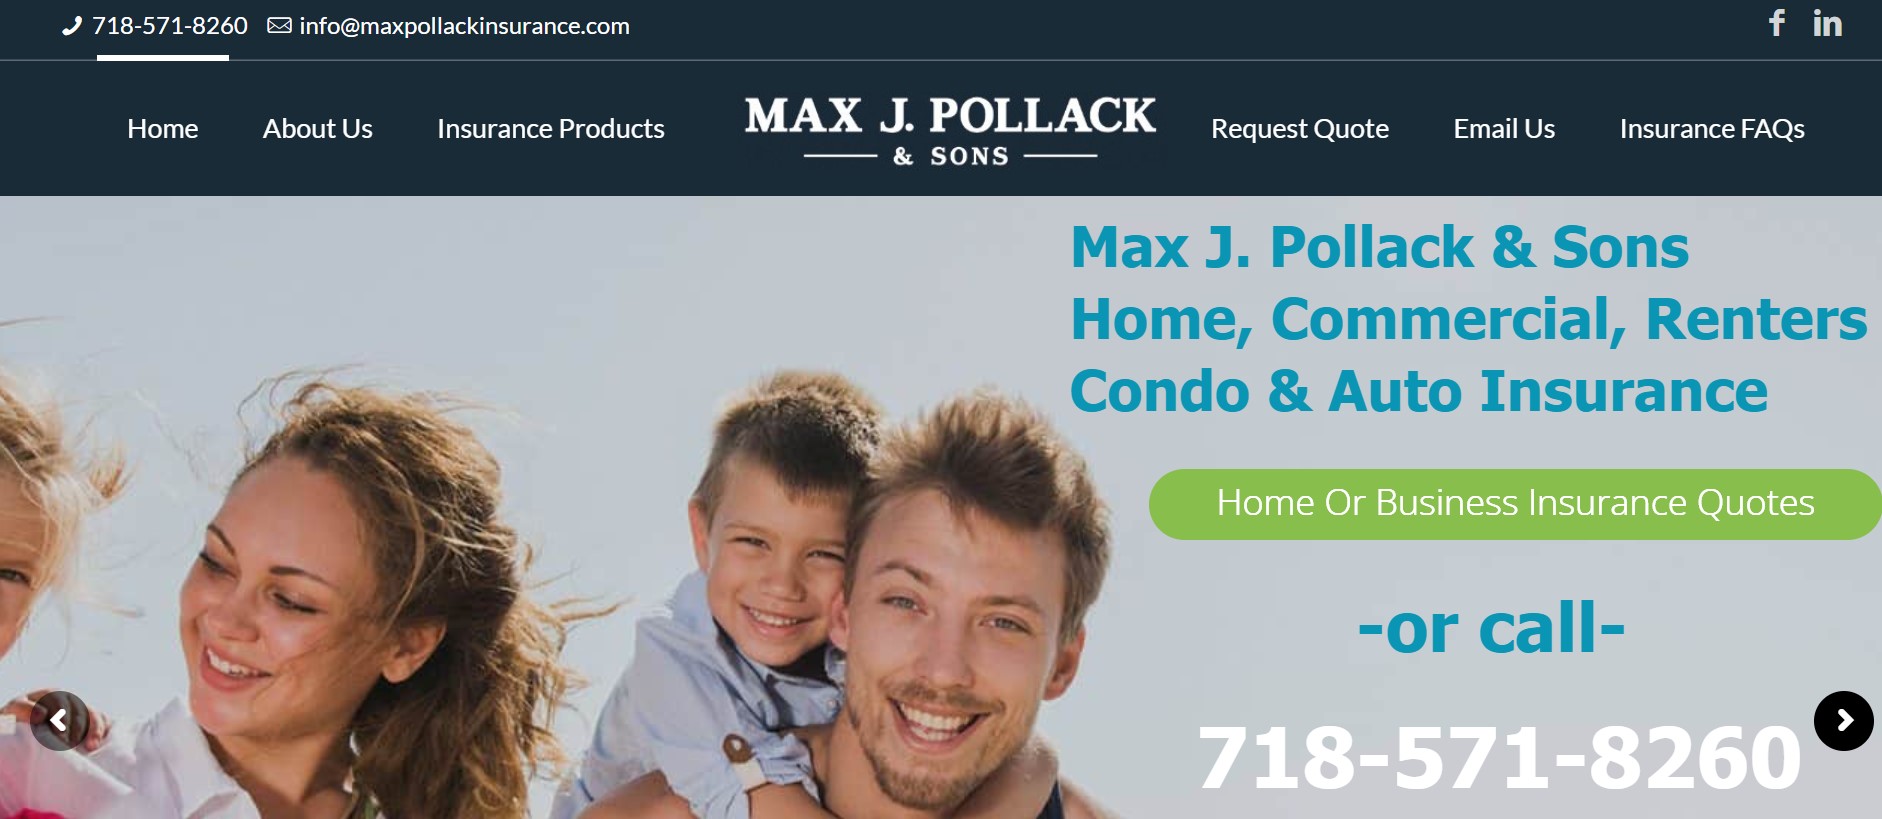 Max J. Pollack & Sons